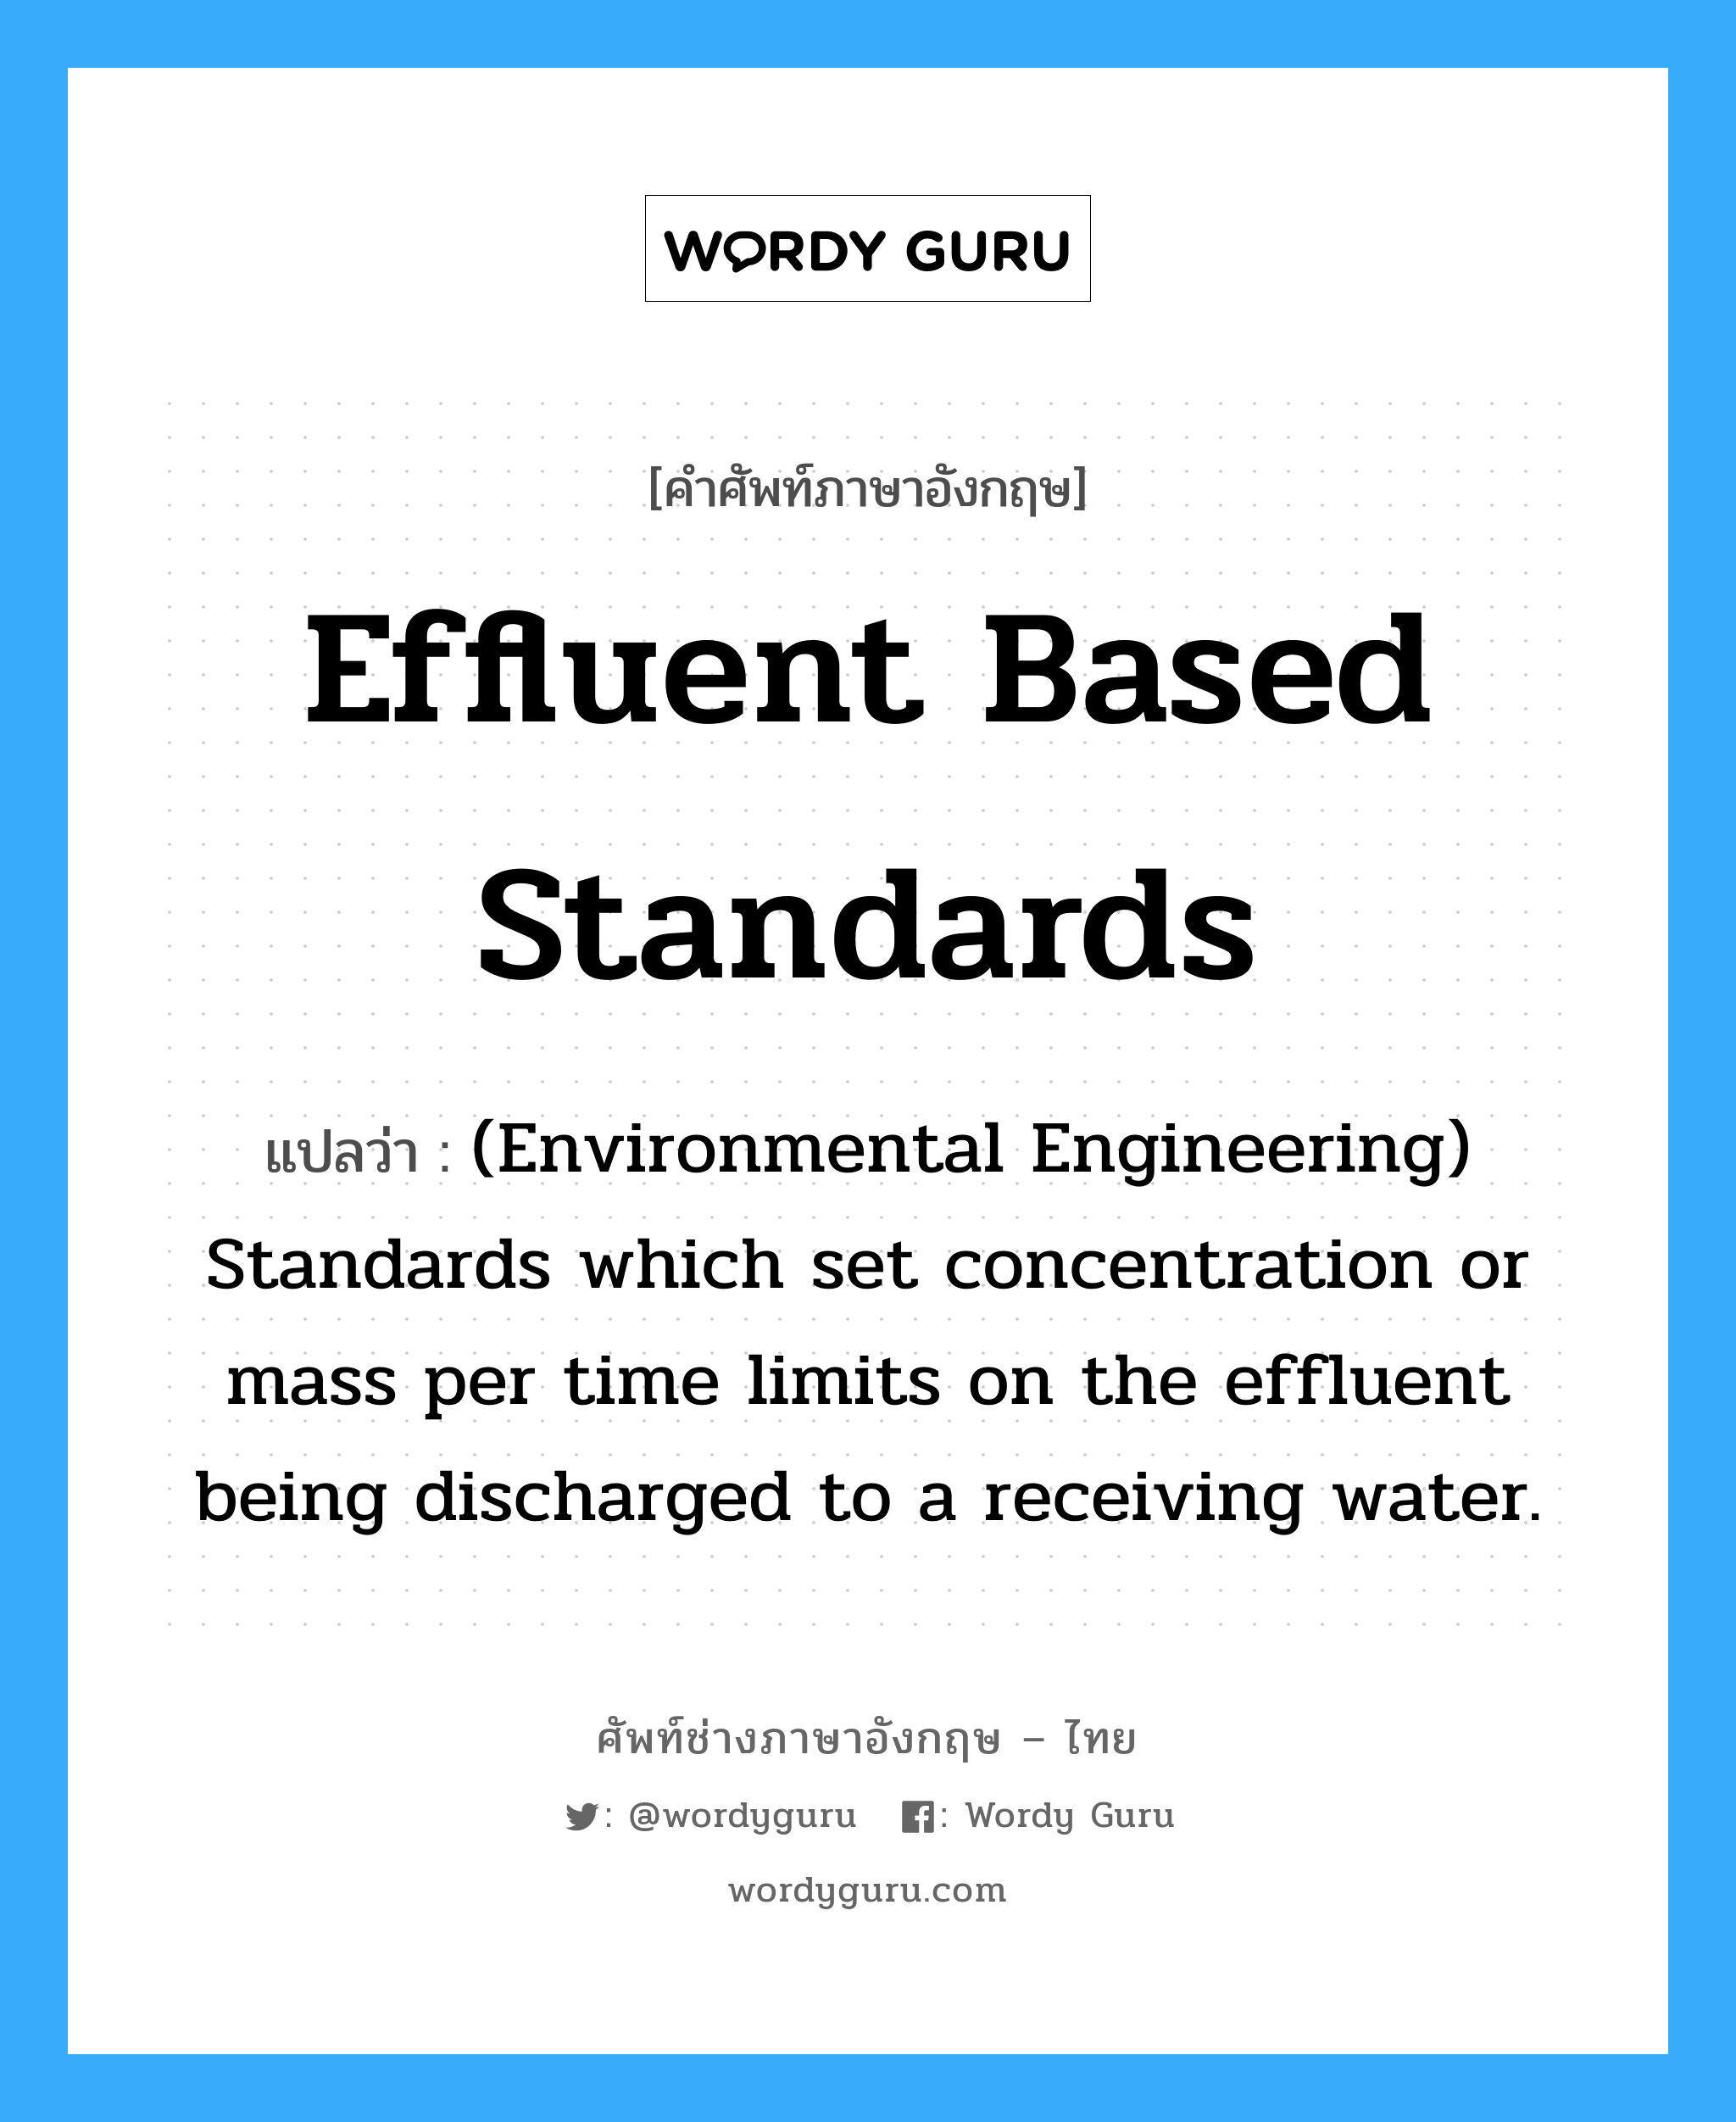 Effluent based standards แปลว่า?, คำศัพท์ช่างภาษาอังกฤษ - ไทย Effluent based standards คำศัพท์ภาษาอังกฤษ Effluent based standards แปลว่า (Environmental Engineering) Standards which set concentration or mass per time limits on the effluent being discharged to a receiving water.